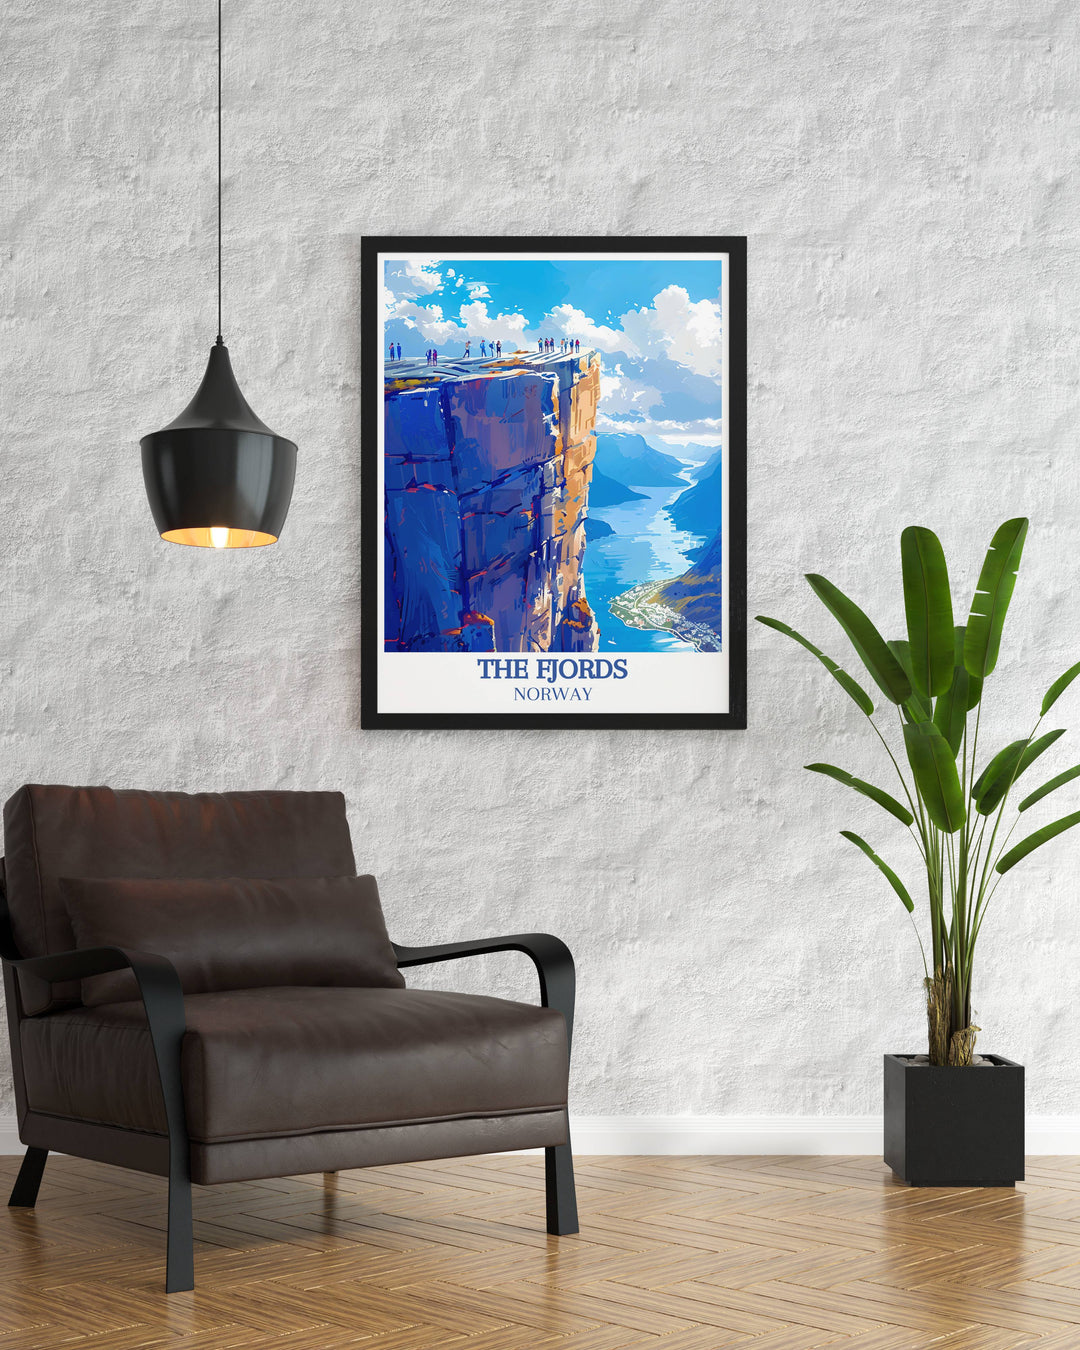 Norway prints and posters offering a diverse selection of artwork that celebrates the countrys natural beauty and adventure, perfect for travel enthusiasts and art lovers.